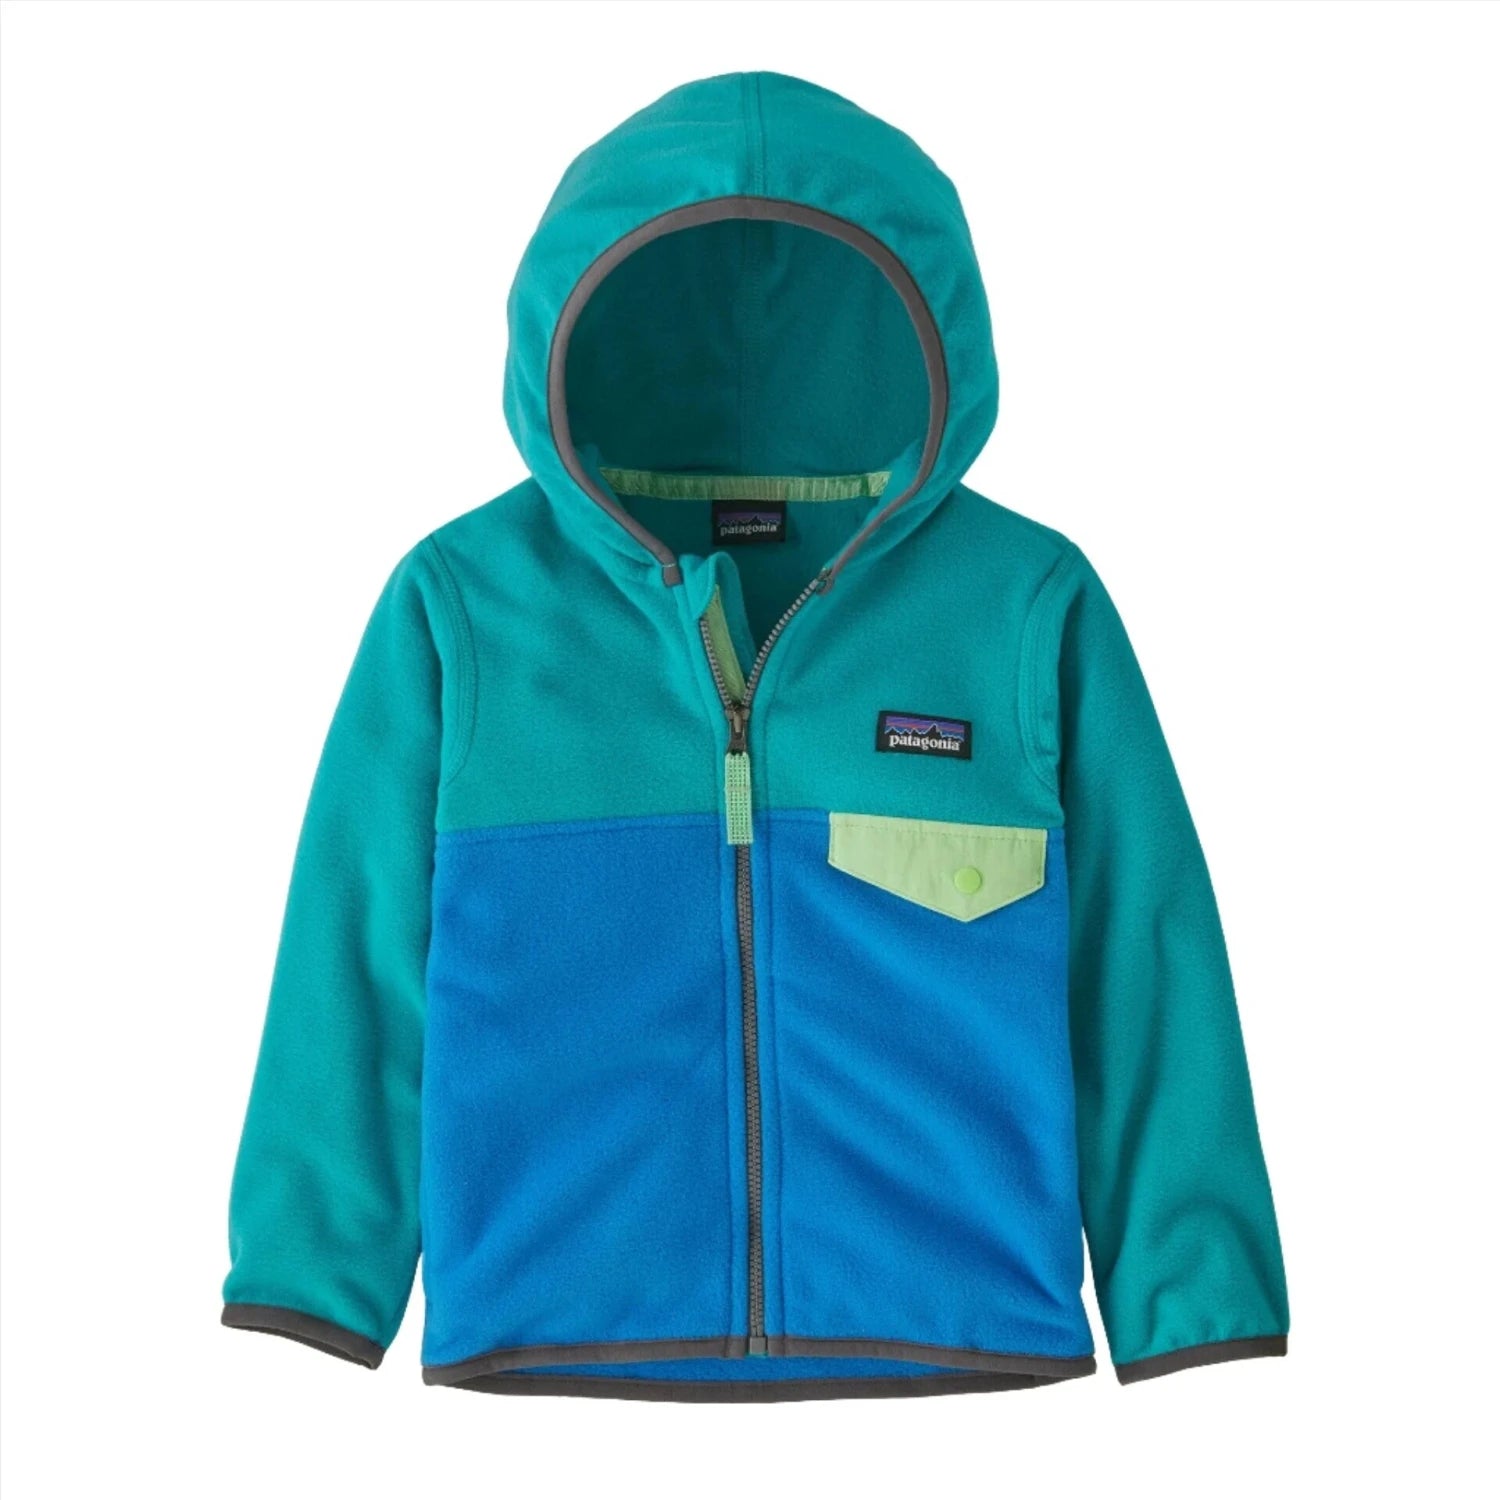 Patagonia Baby Micro D® Snap-T® Fleece Jacket, Vessel Blue, front view flat 